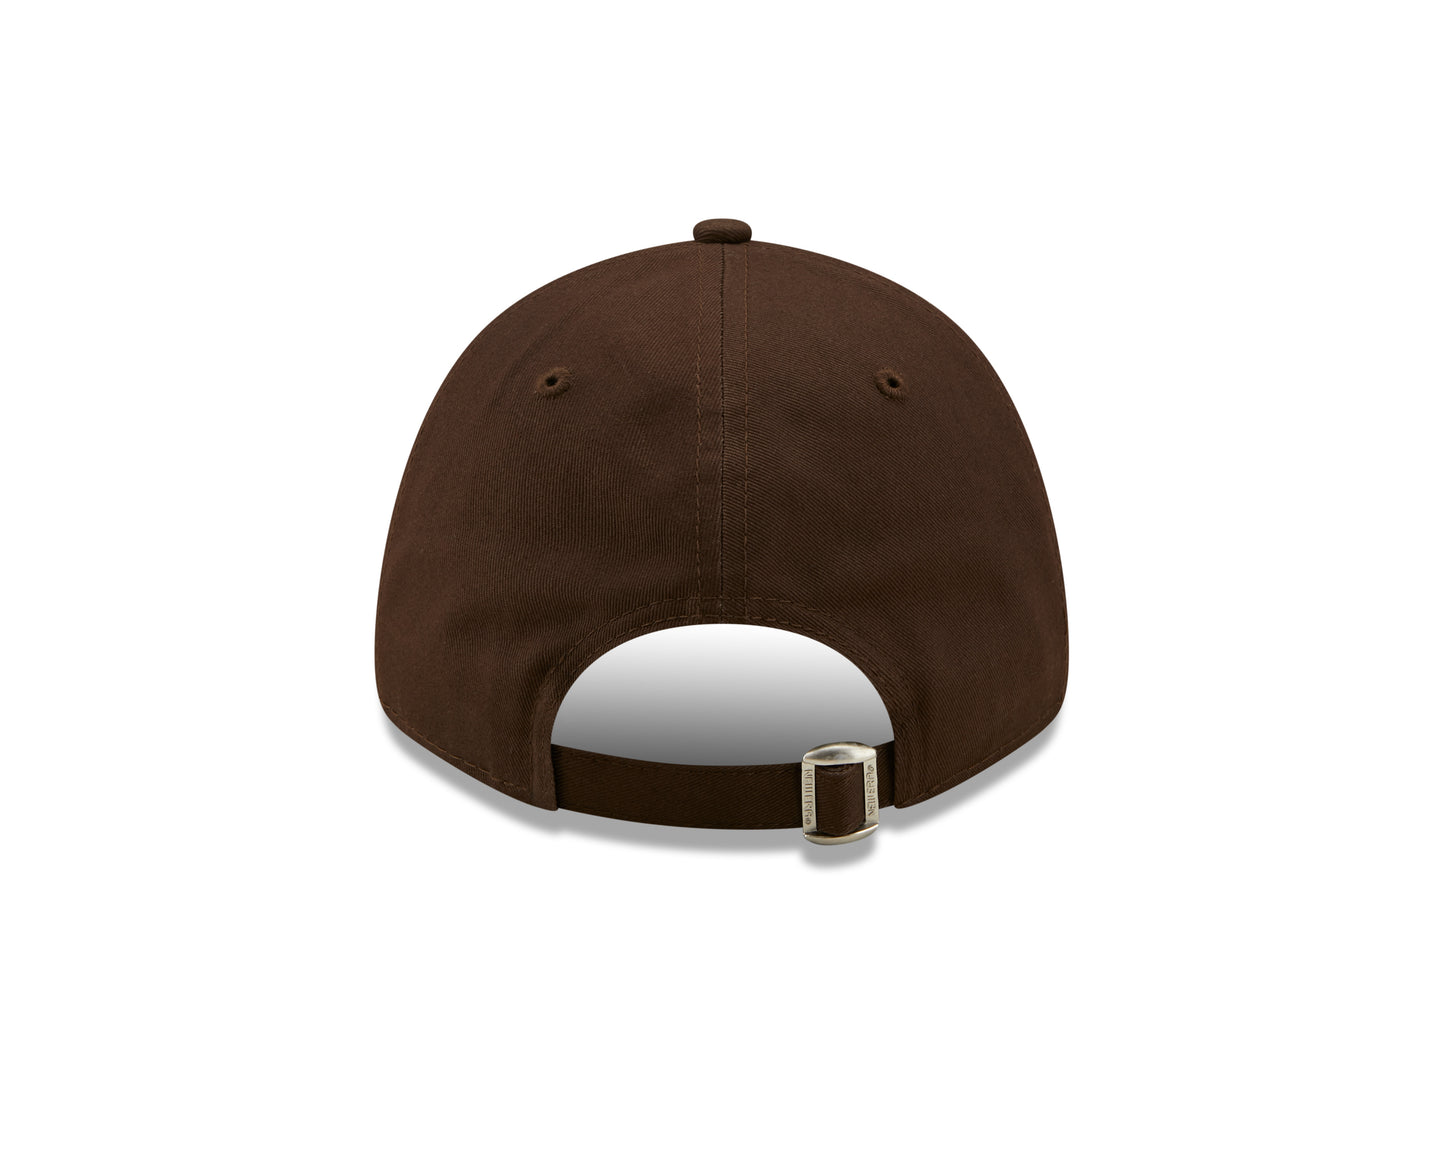 New York Yankees Cap 9Forty League Essentials - Brown/Stone